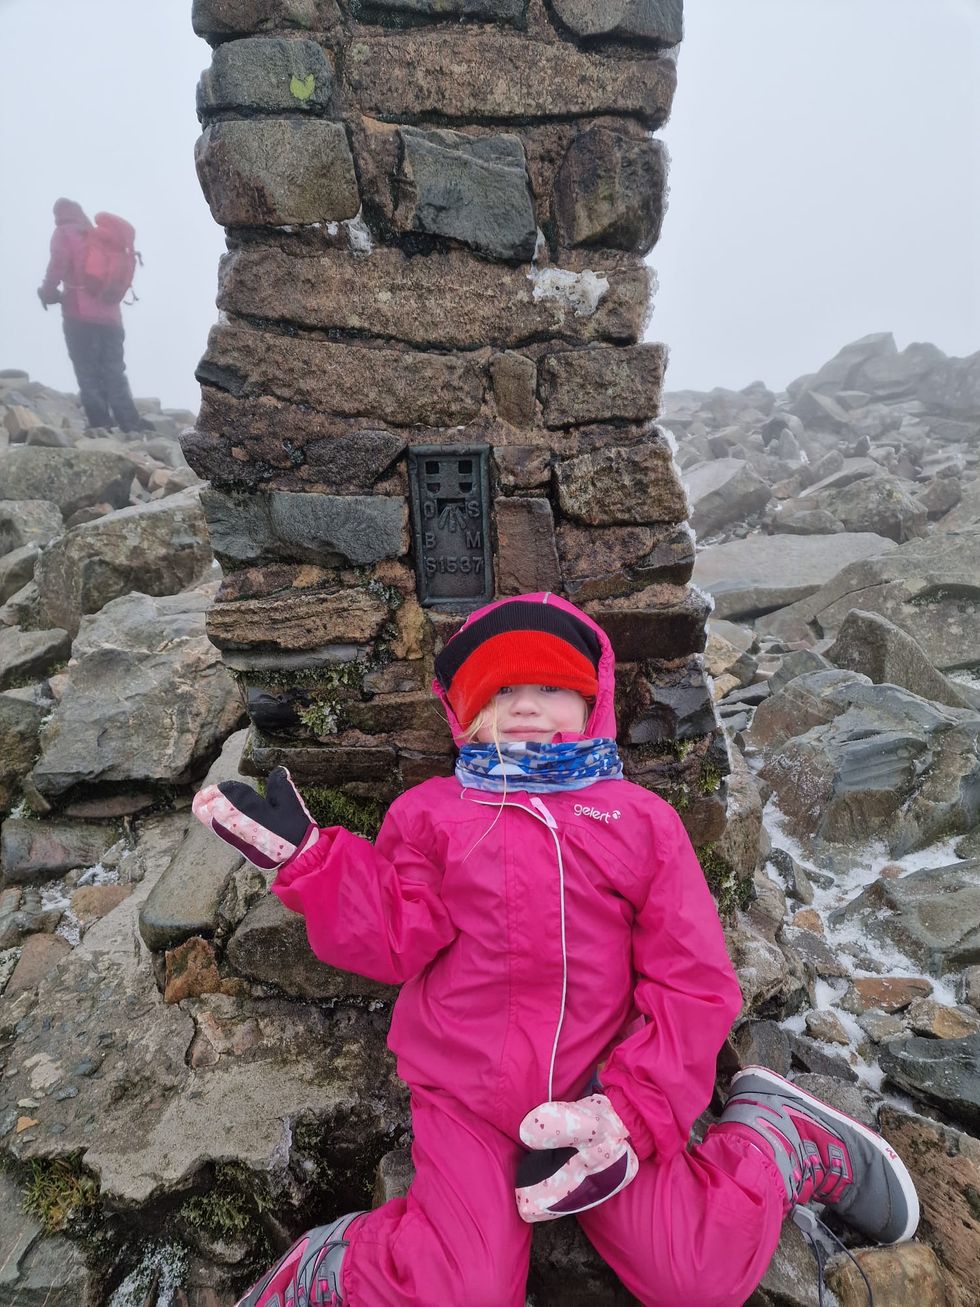 Seren summiting Scaffel Pike despite extreme winter conditions. (Glyn Price/Just Giving)